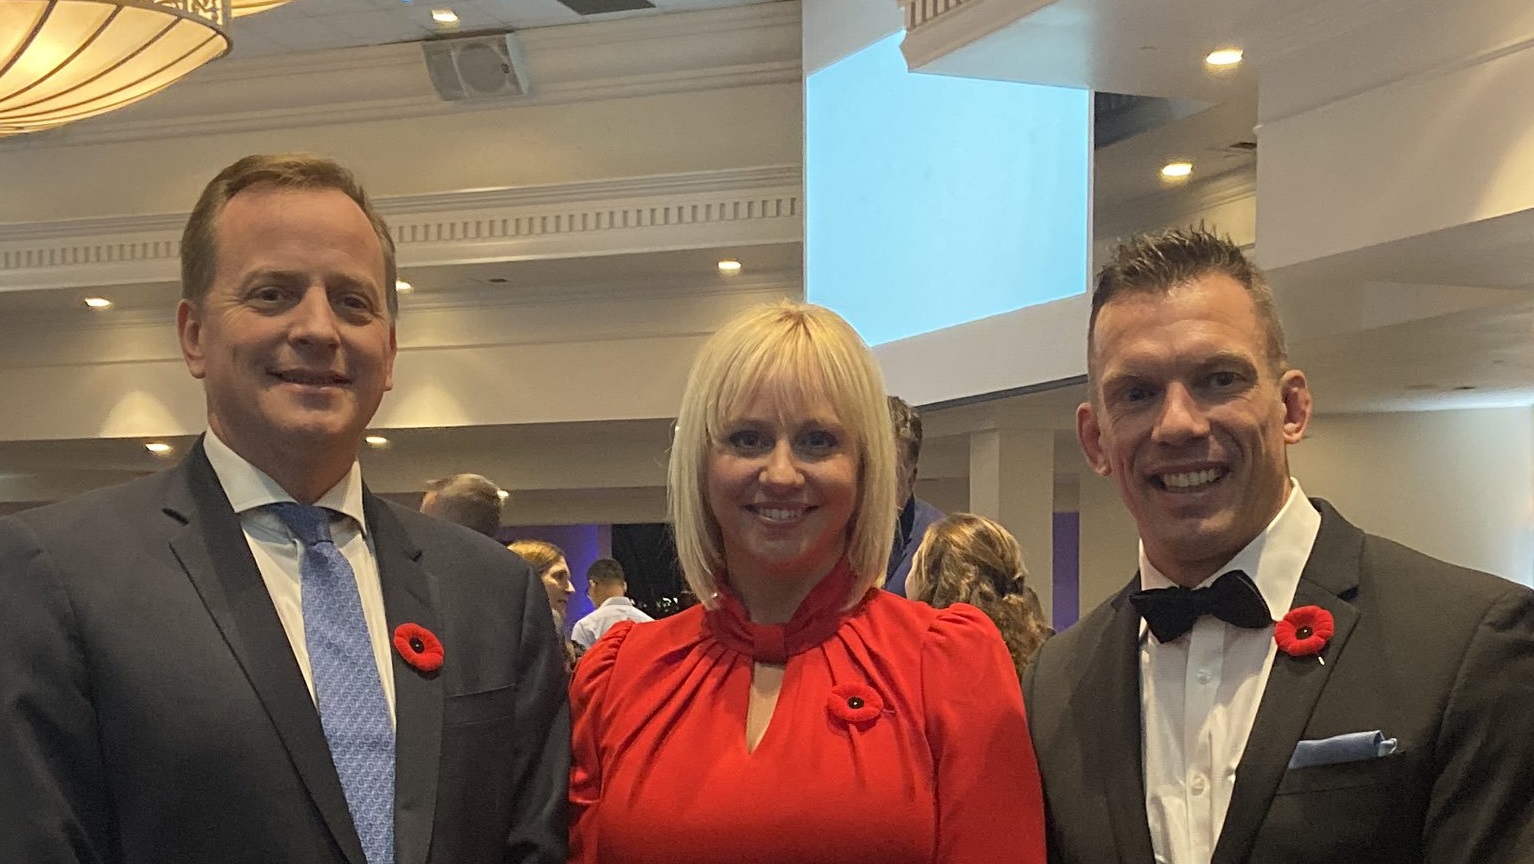 Minister of Environment Conservation and Parks Jeff Yurek with TRCA Chair Jennifer Innis and TRCA CEO John MacKenzie celebrate environmental leaders at Living City Dinner